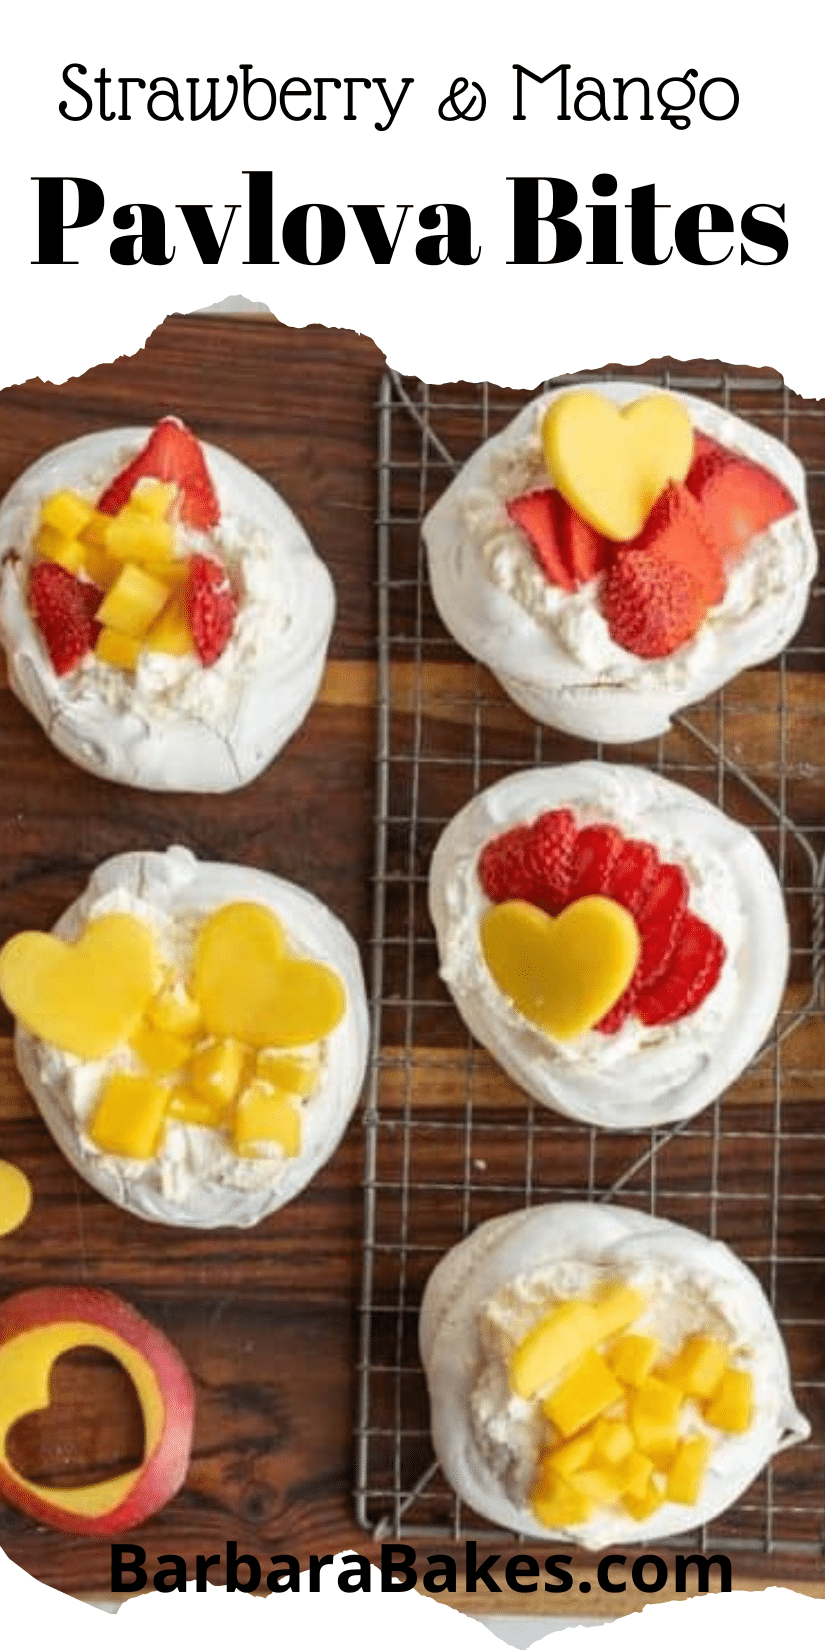 Mini Pavlova is an individual serving dessert that is beautiful, dainty and way easier to make than you think! via @barbarabakes